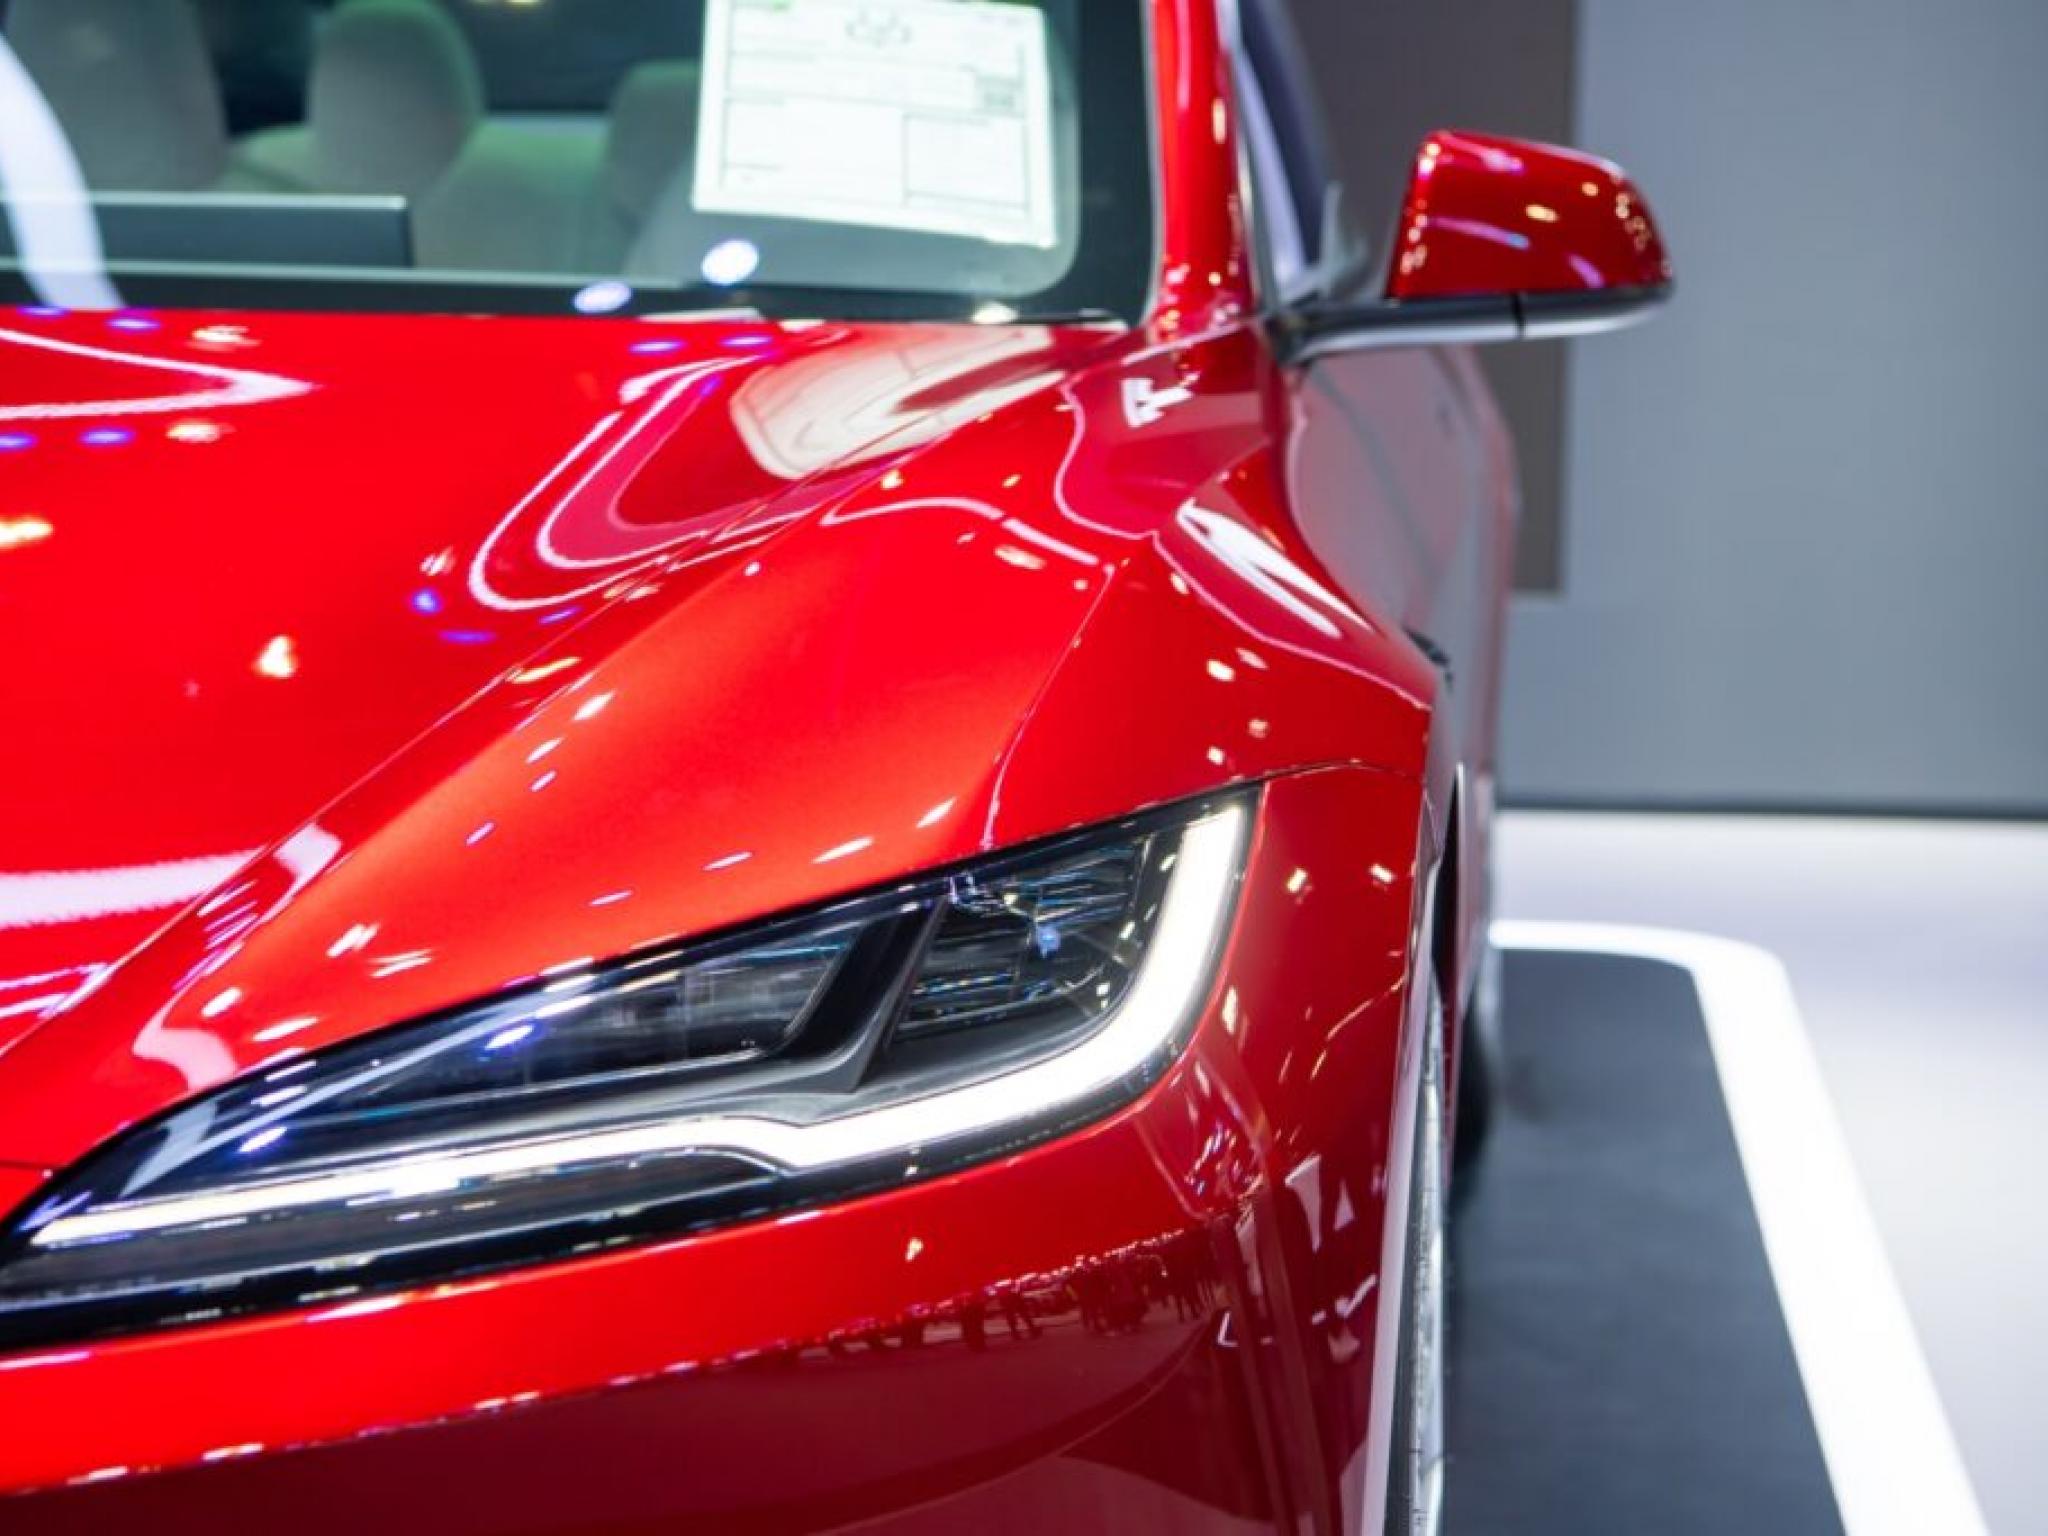  tesla-increases-price-of-model-3-performance-by-1k-in-us-days-after-launch 